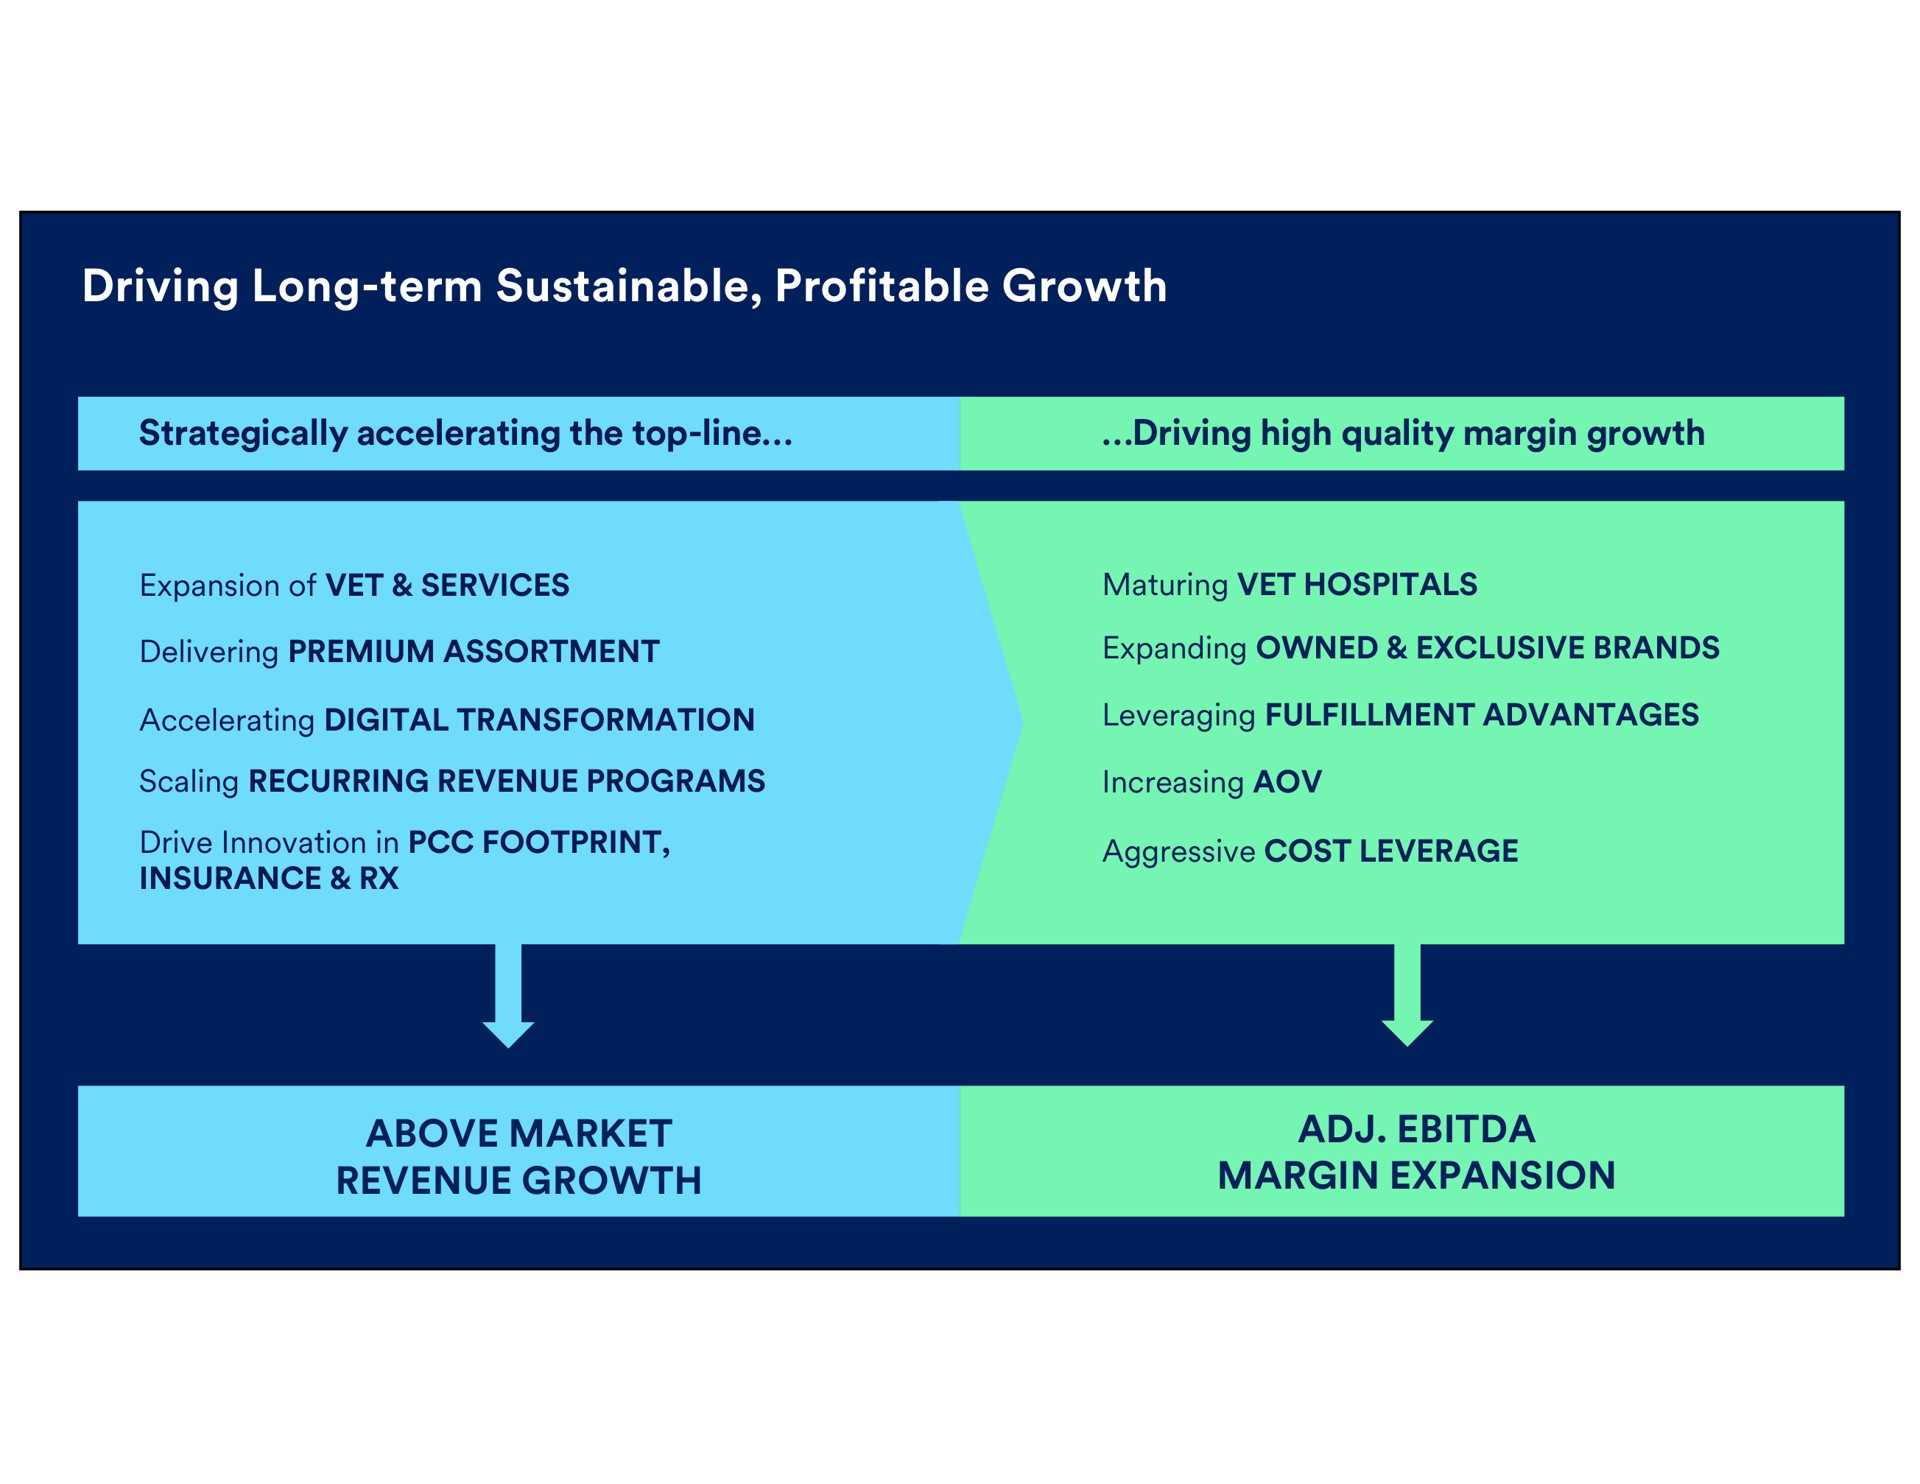 driving long term sustainable profitable growth strategically accelerating the top line high quality margin expansion of vet services maturing vet hospitals delivering premium assortment expanding owned exclusive brands accelerating digital transformation leveraging fulfillment advantages increasing scaling recurring revenue programs drive innovation in footprint insurance margin expansion above market revenue aggressive cost leverage | Petco